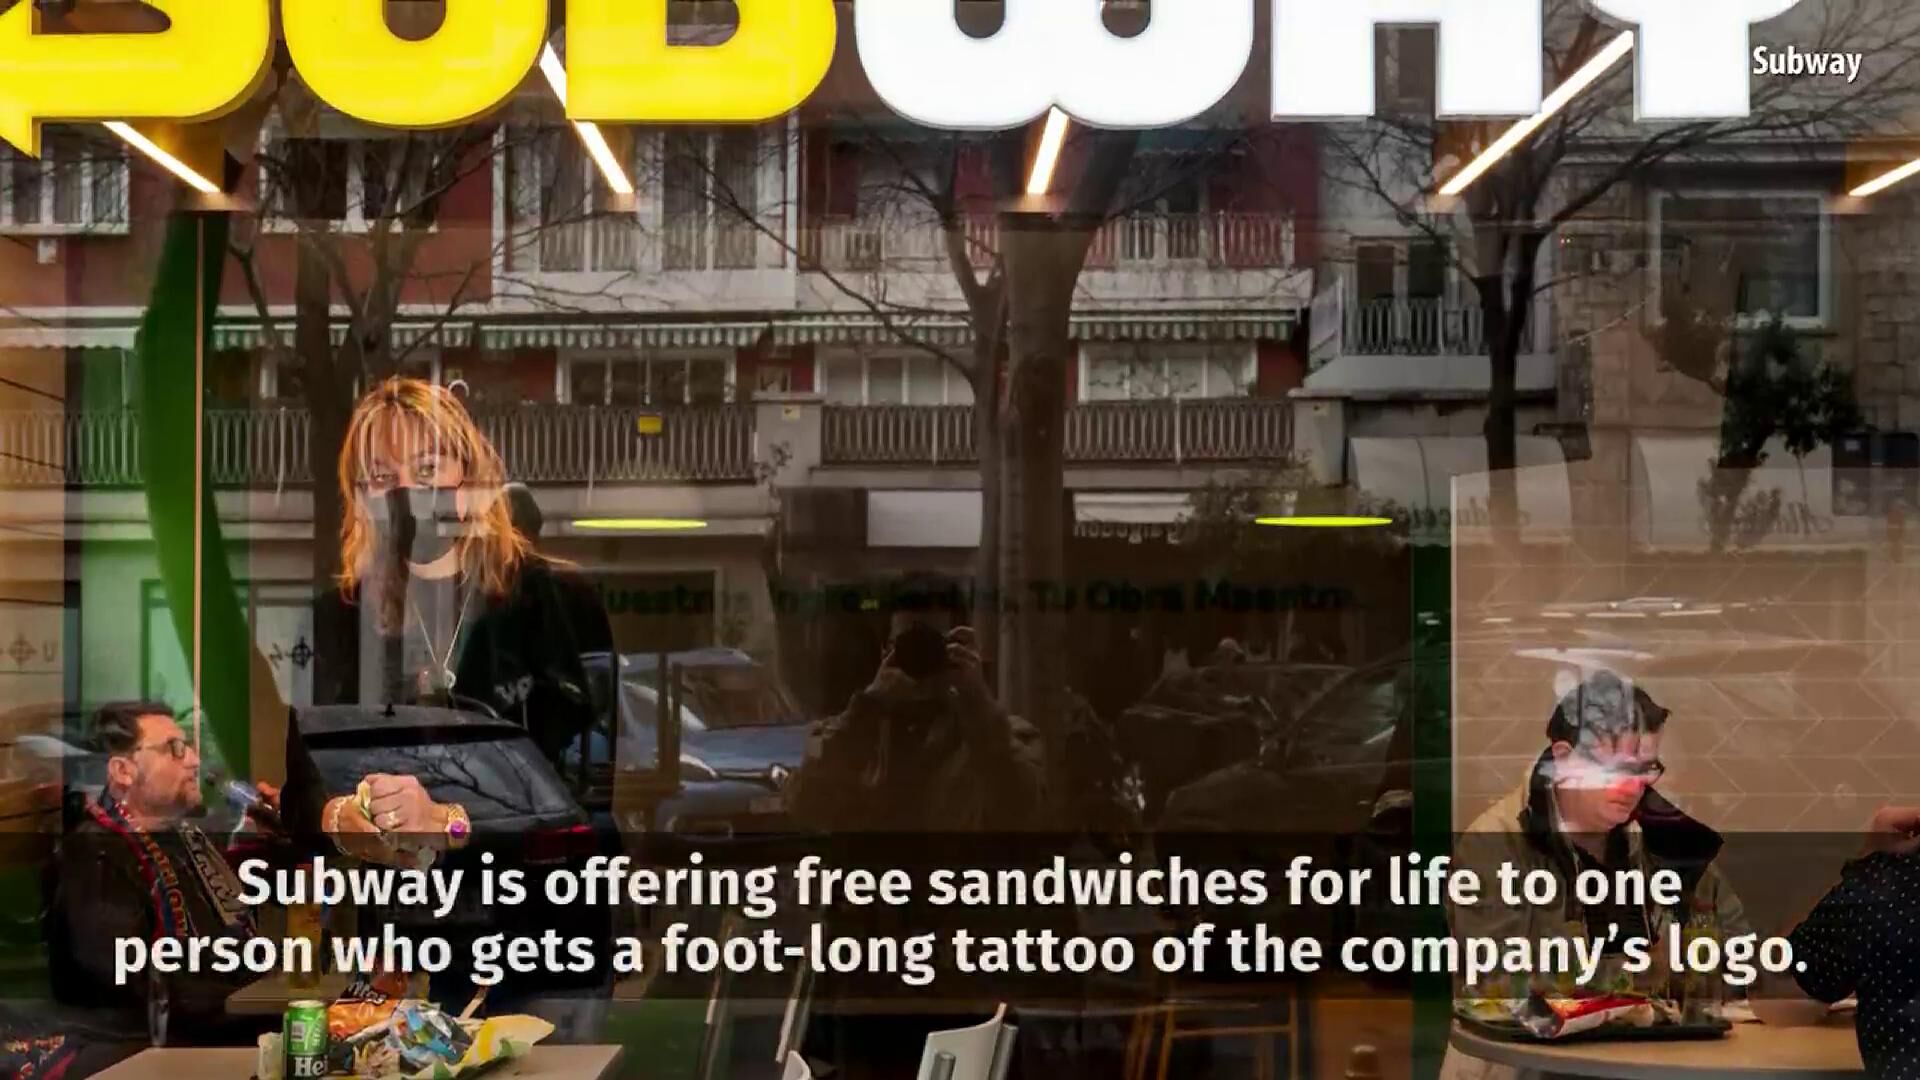 Love The New Subway Series Prove It With a Tattoo and You Could Get Subway  for Life  RestaurantNewscom